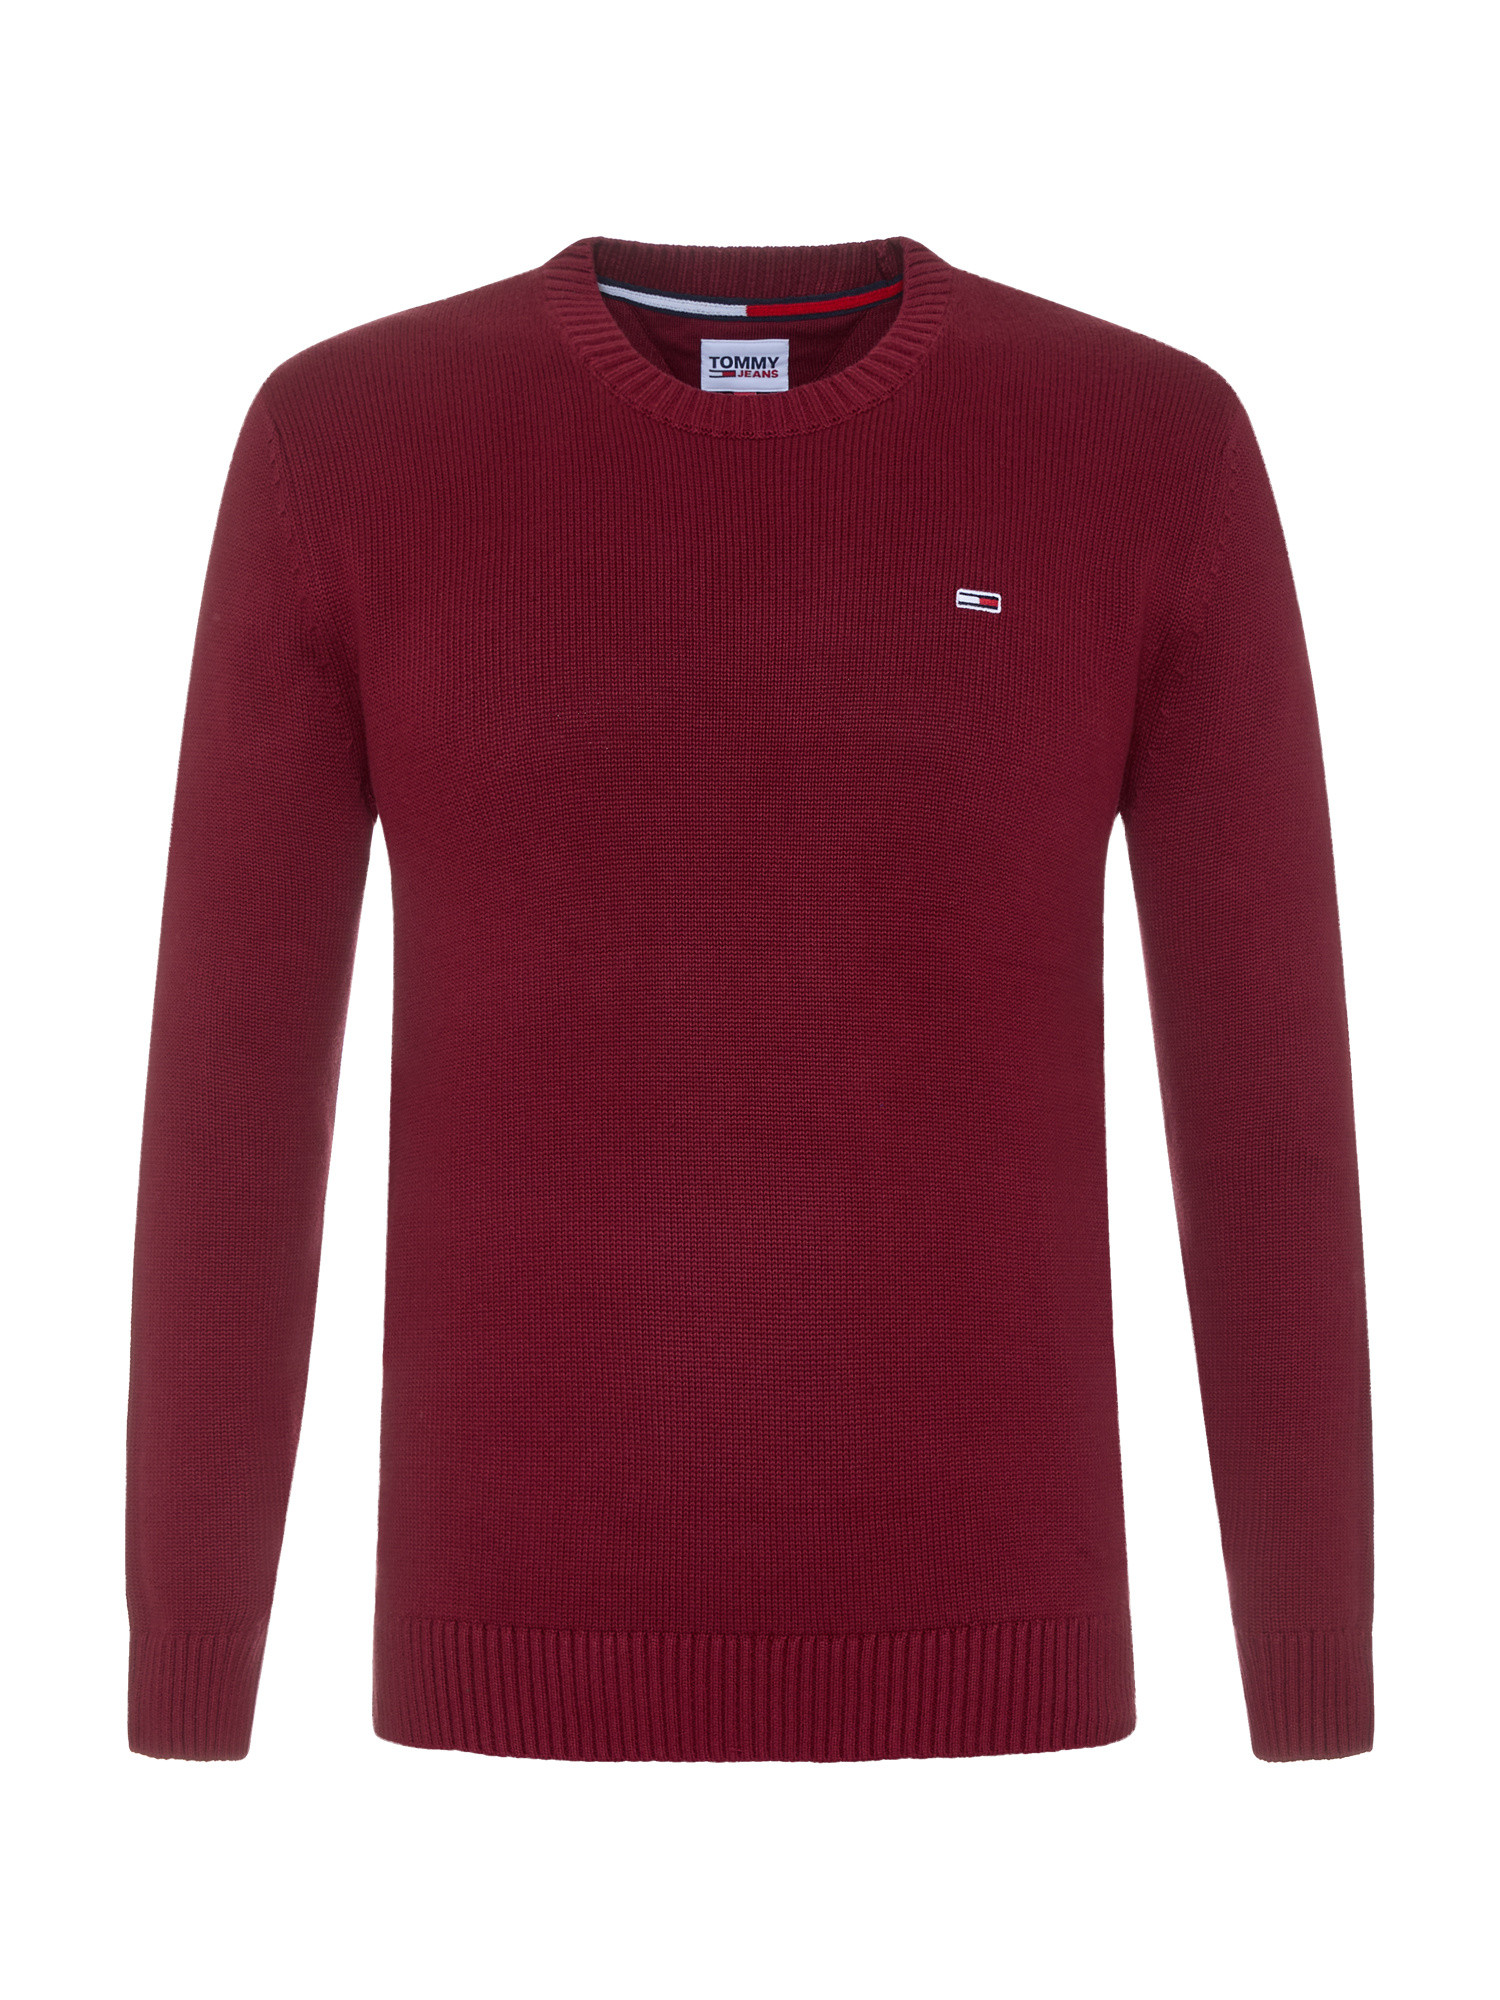 Tommy Jeans - Regular fit cotton sweater with micro logo, Red, large image number 0